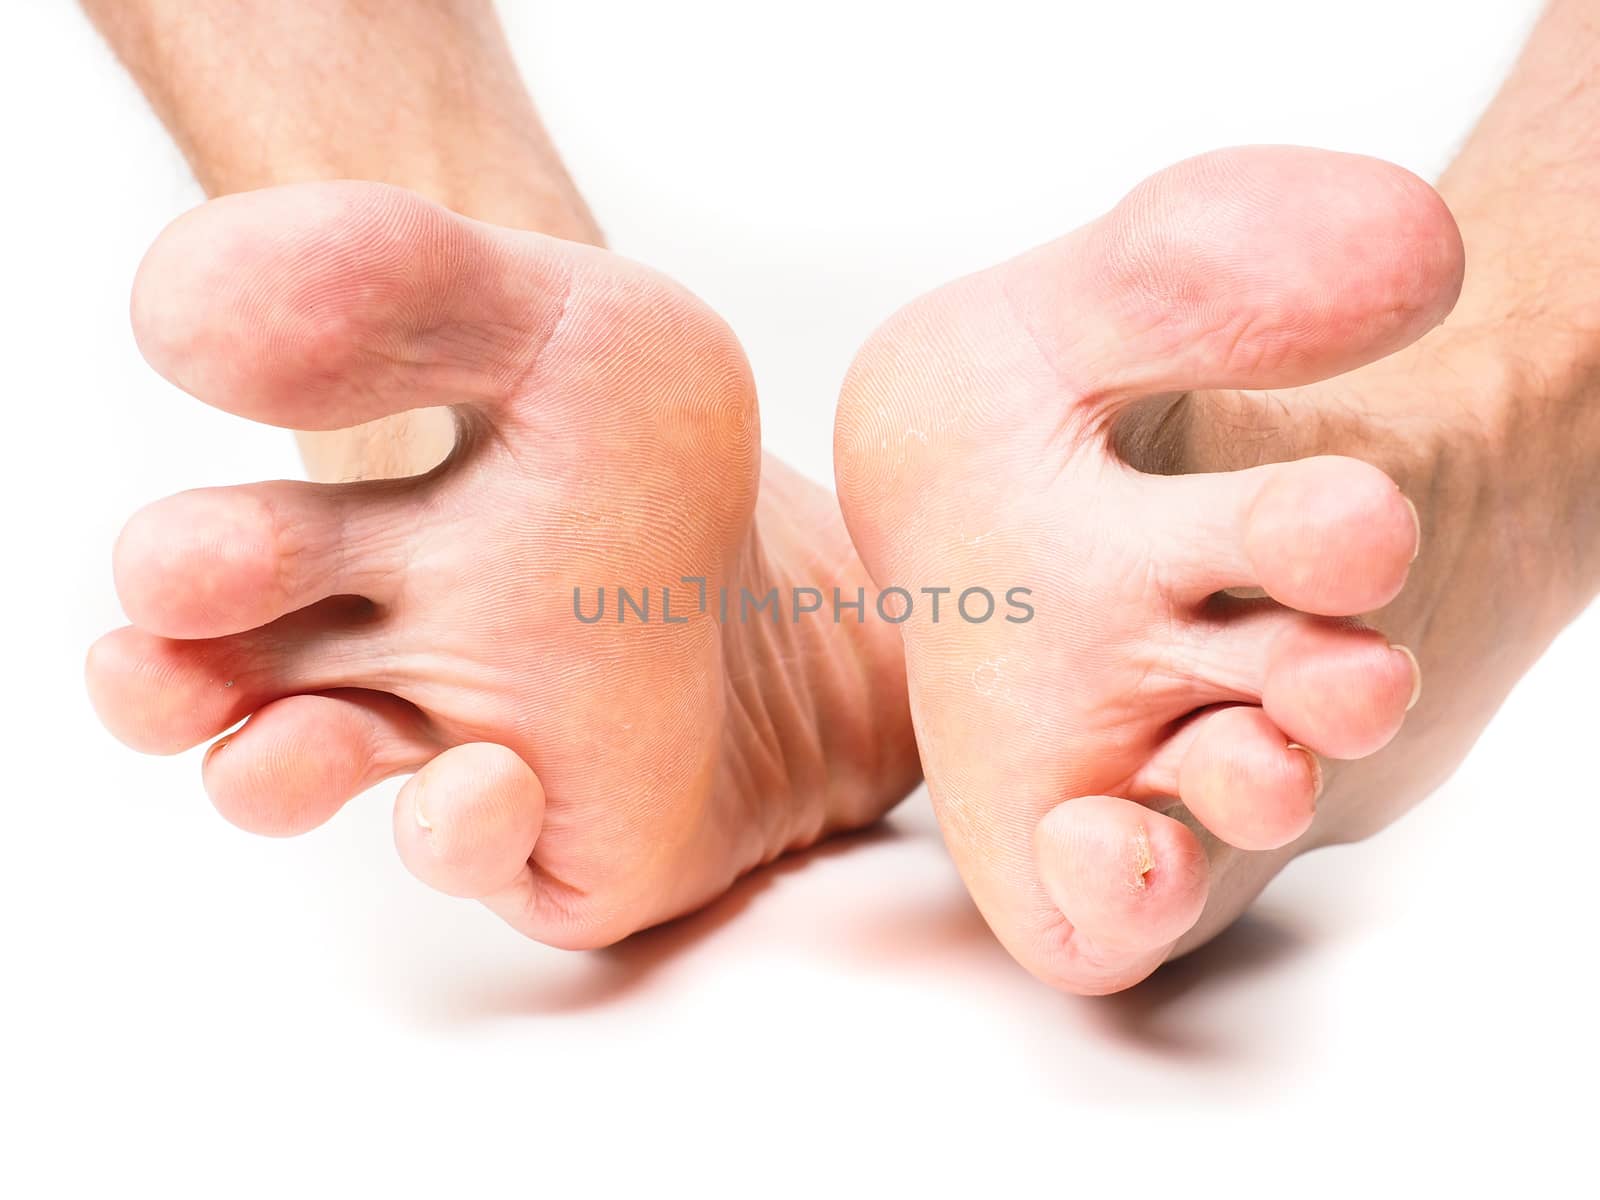 Male person spreading toes towards white background